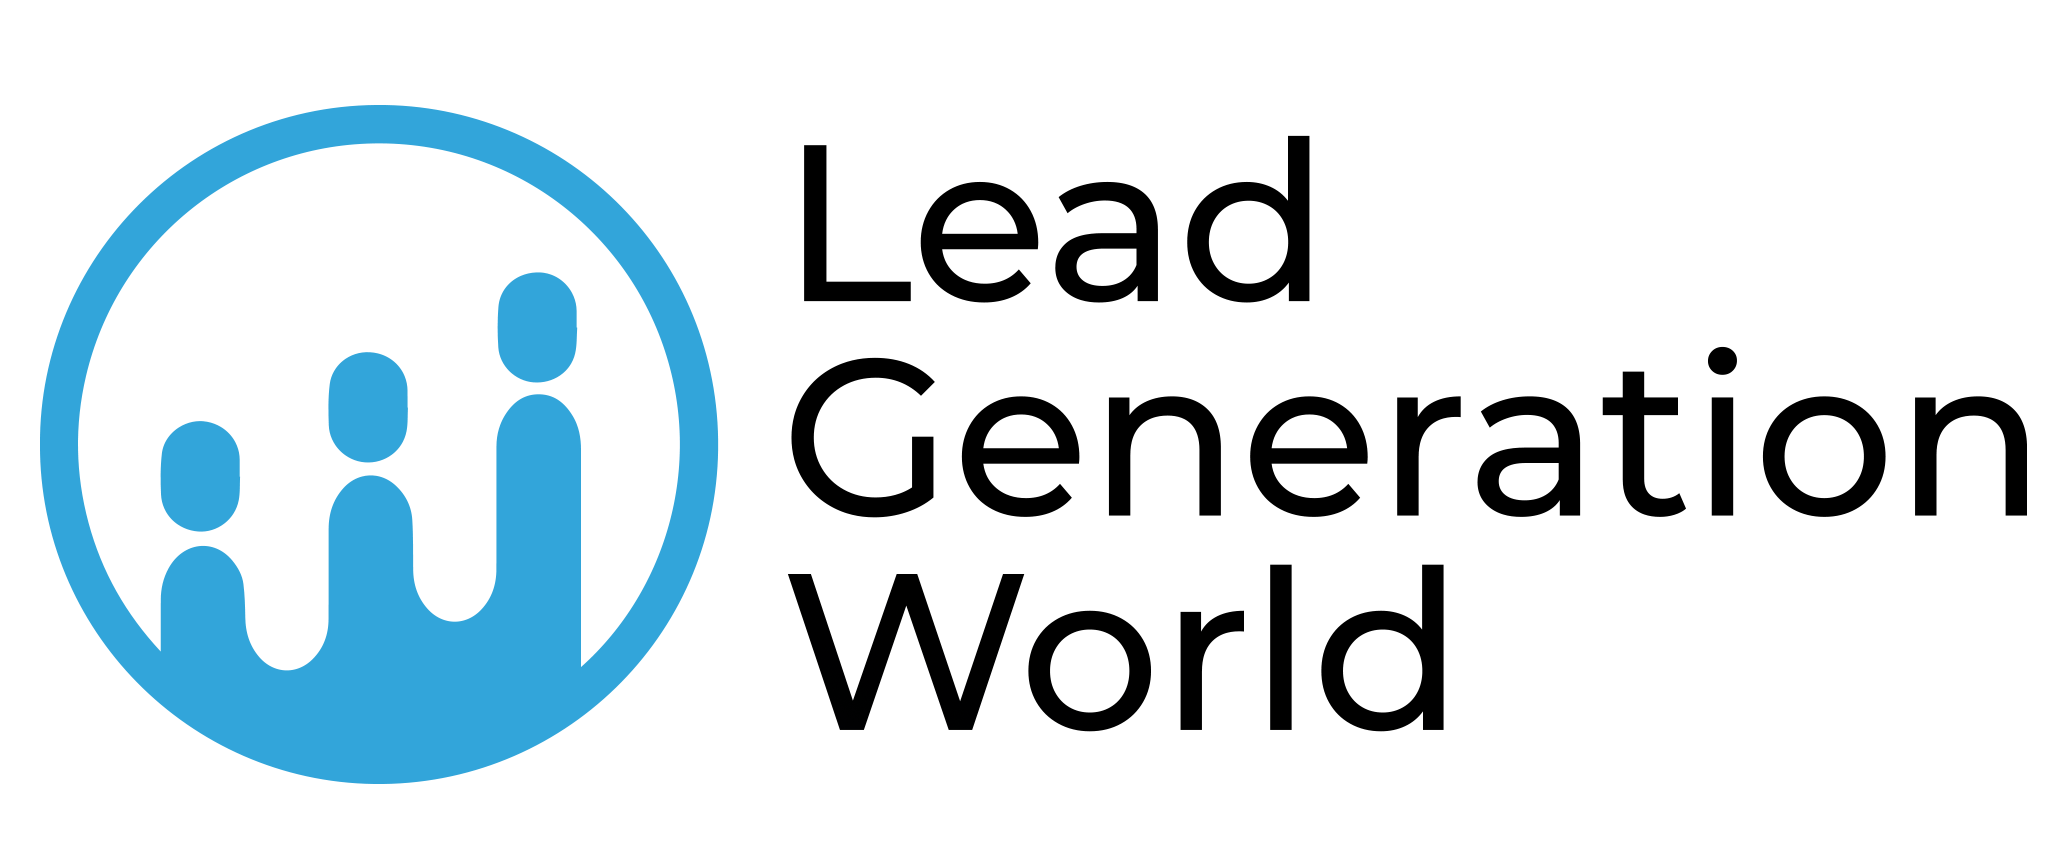 Lead Generation World Conference San Diego January 1618, 2022